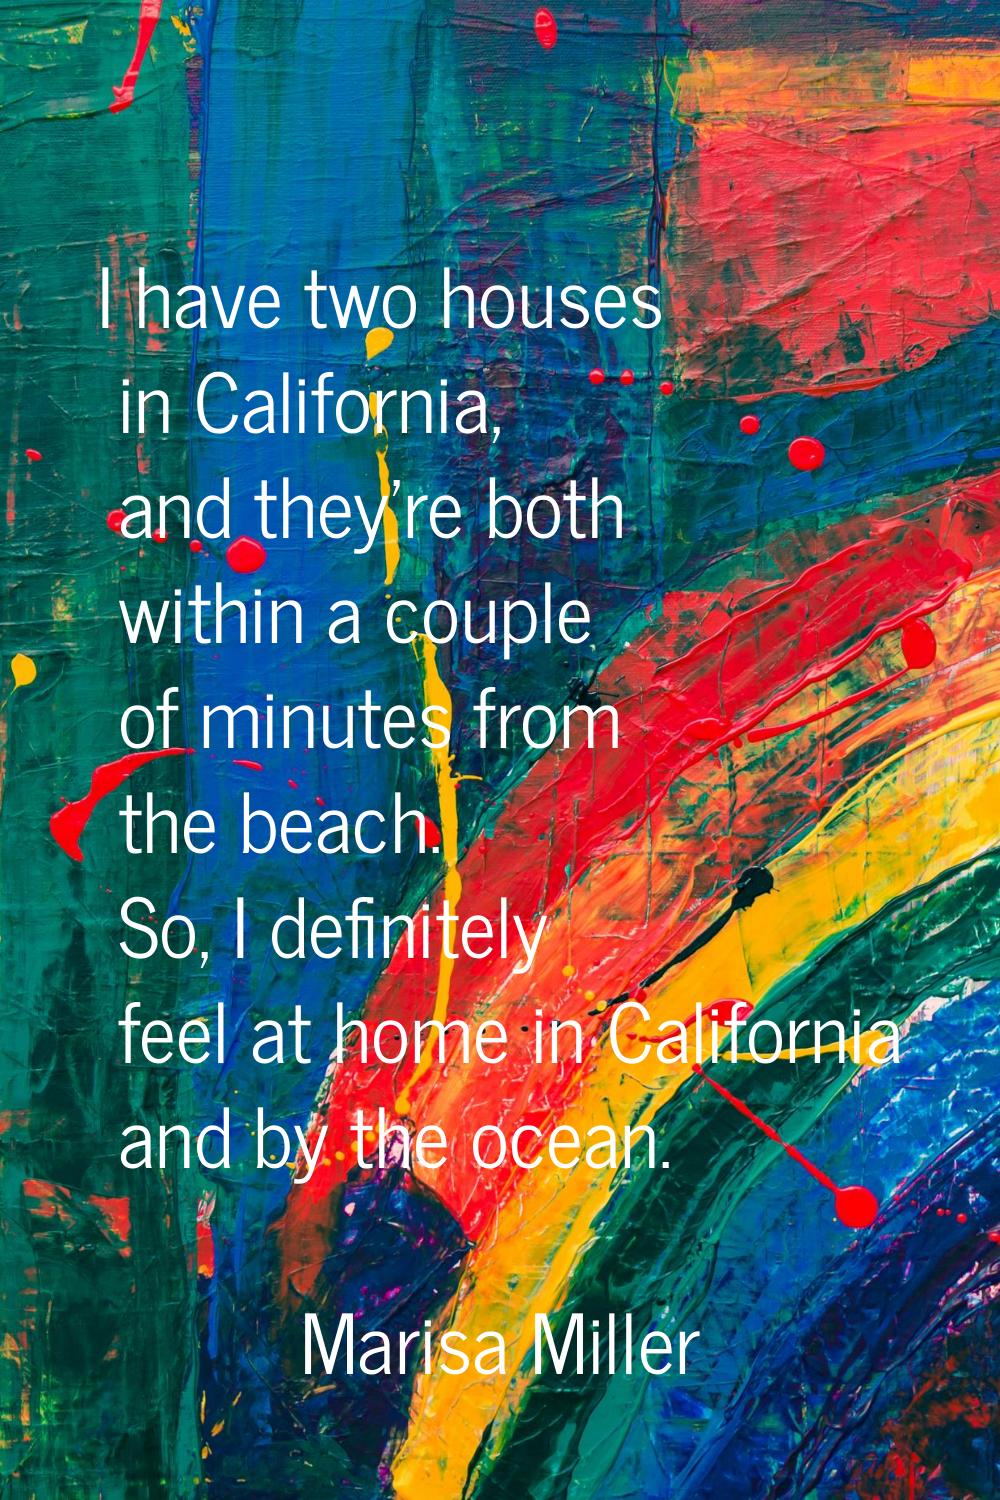 I have two houses in California, and they're both within a couple of minutes from the beach. So, I 